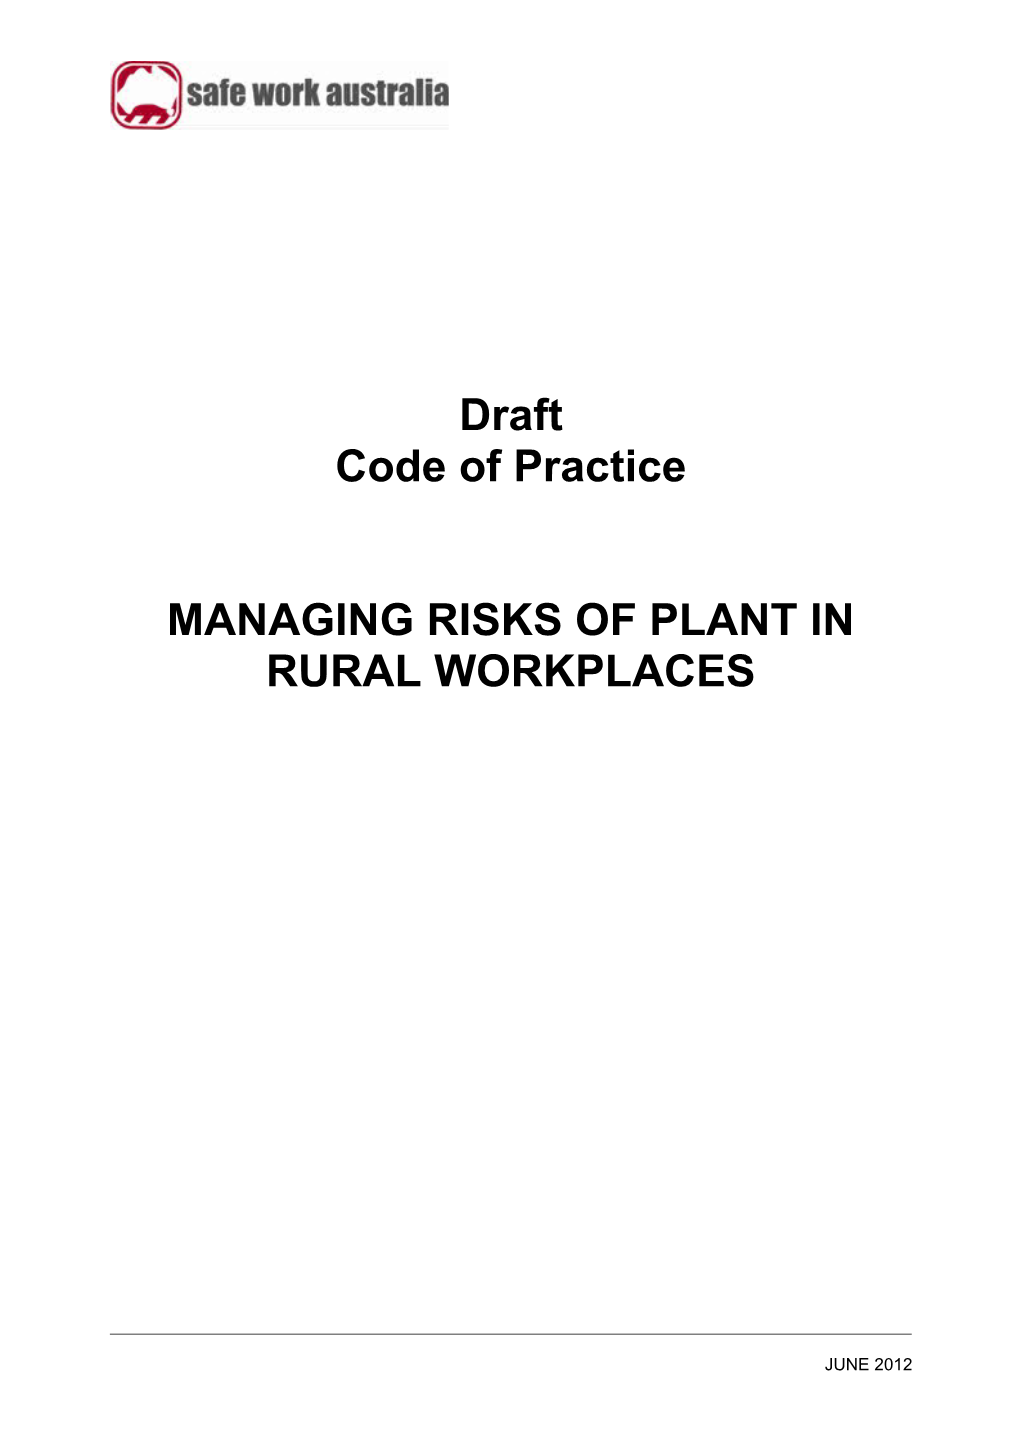 Managing Risks of Plant in Rural Workplaces